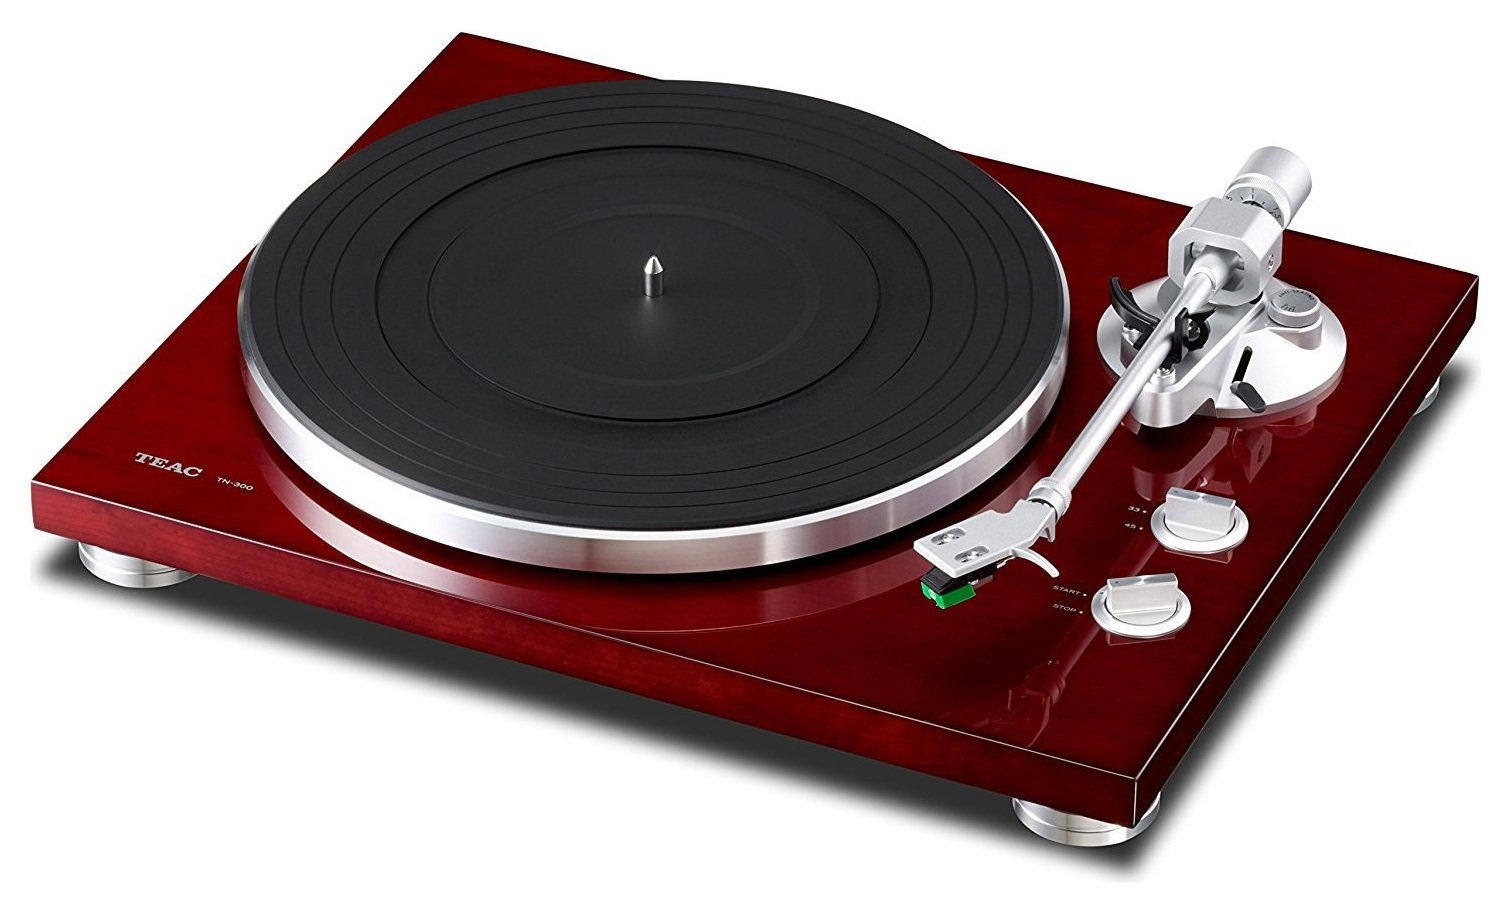 Teac USB Turntable - Glossy Cherry. Review